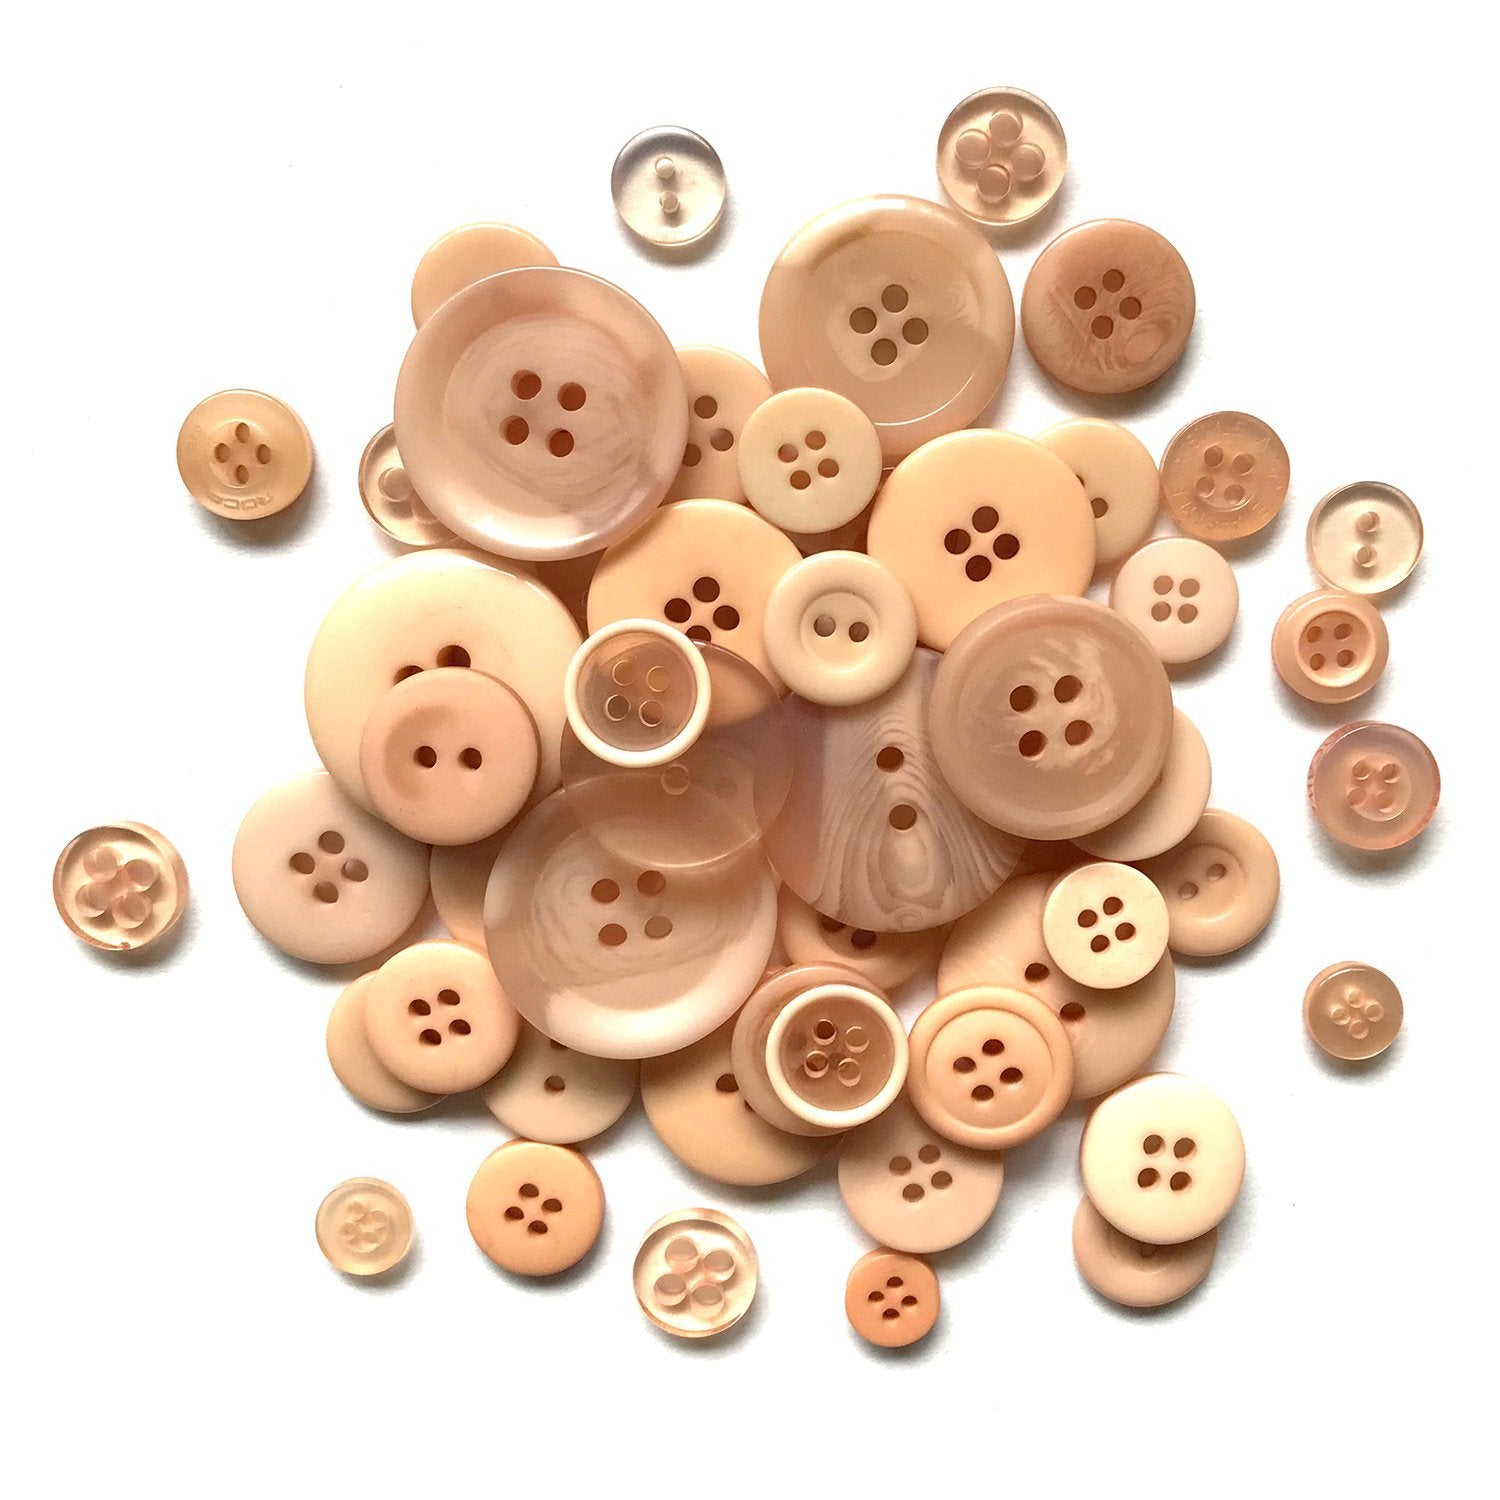  Pack of 12 Beige Buttons 0.6 inch Brown Buttons 4 Hole Round  Buttons Blouse Button Sewing Plastic Buttons Crafts Button 24L